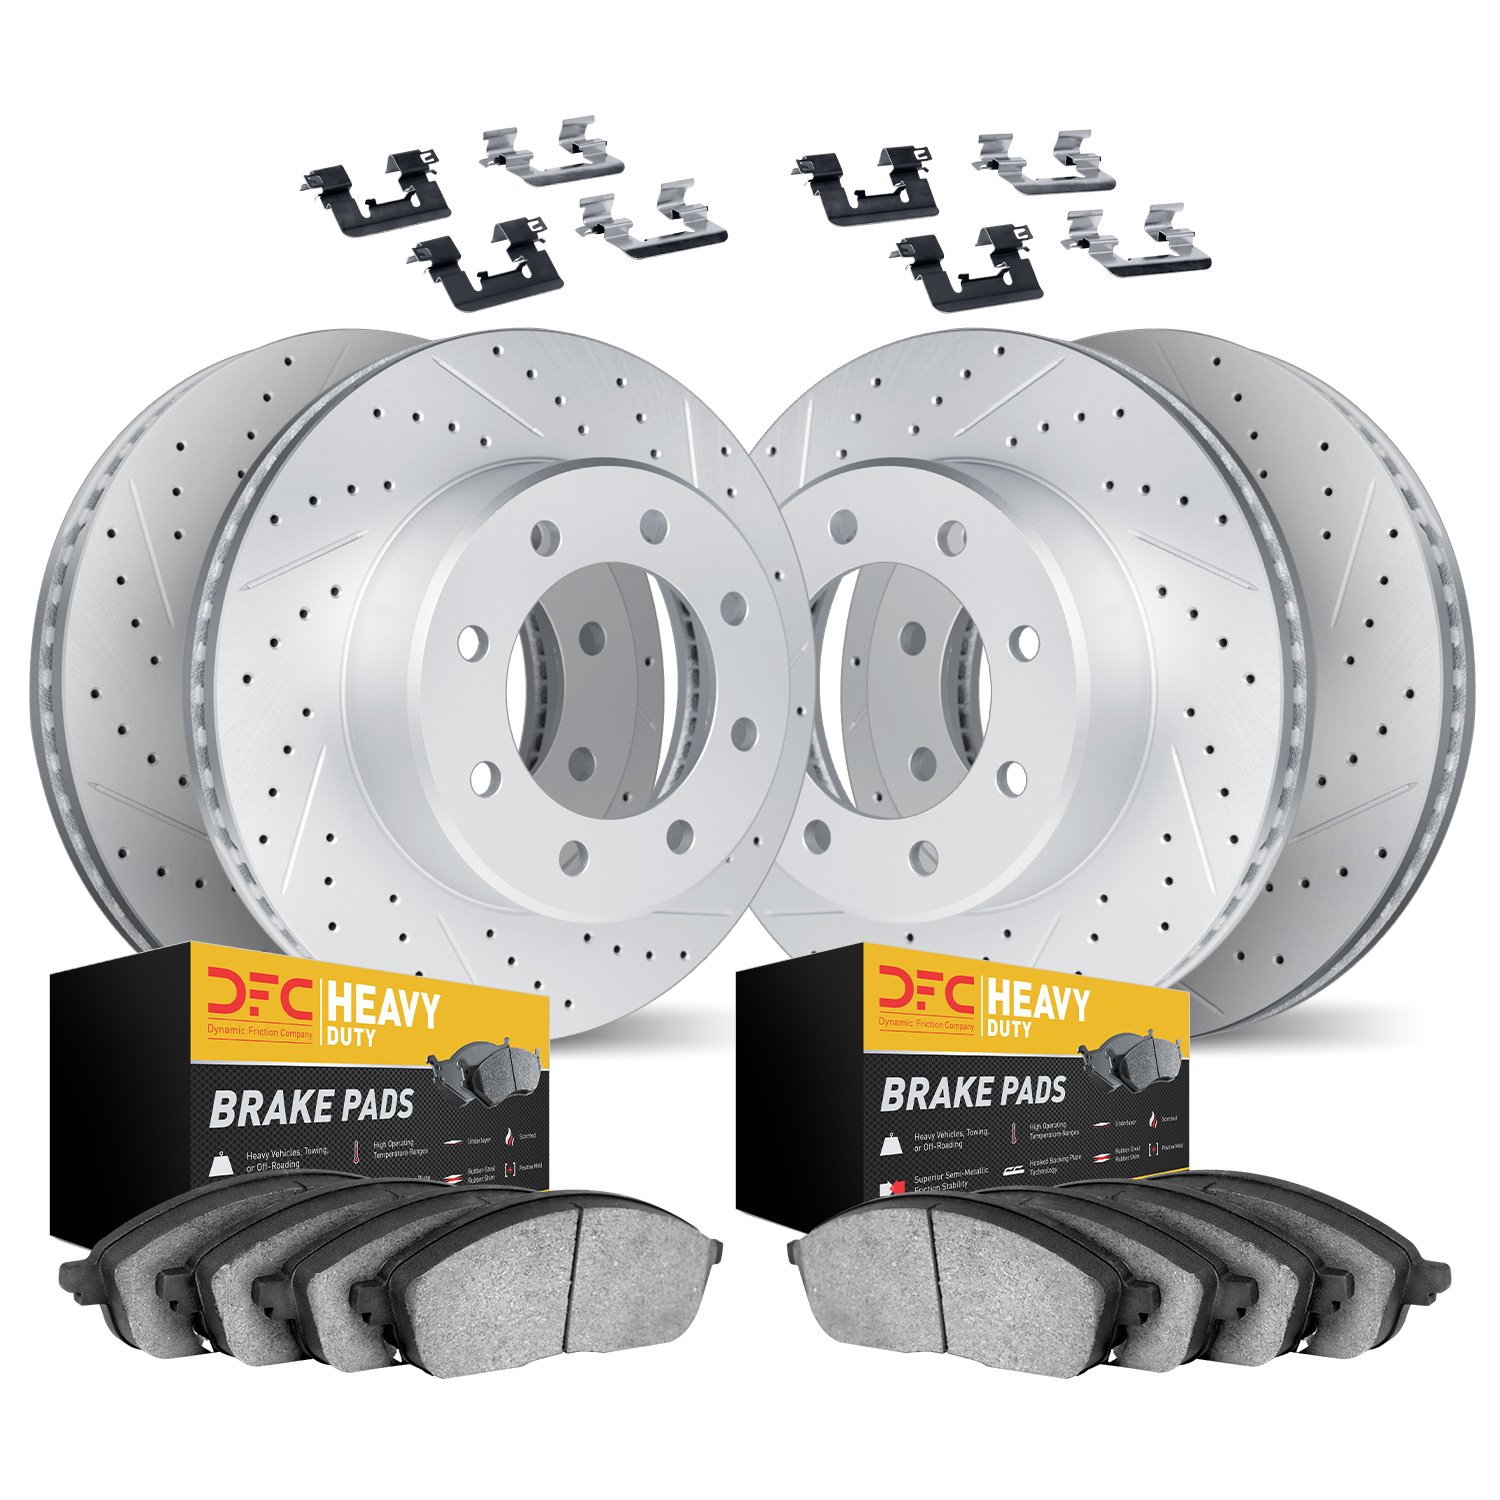 2214-99030 Geoperformance Drilled/Slotted Rotors w/Heavy-Duty Pads Kit & Hardware, 2003-2007 Ford/Lincoln/Mercury/Mazda, Positio